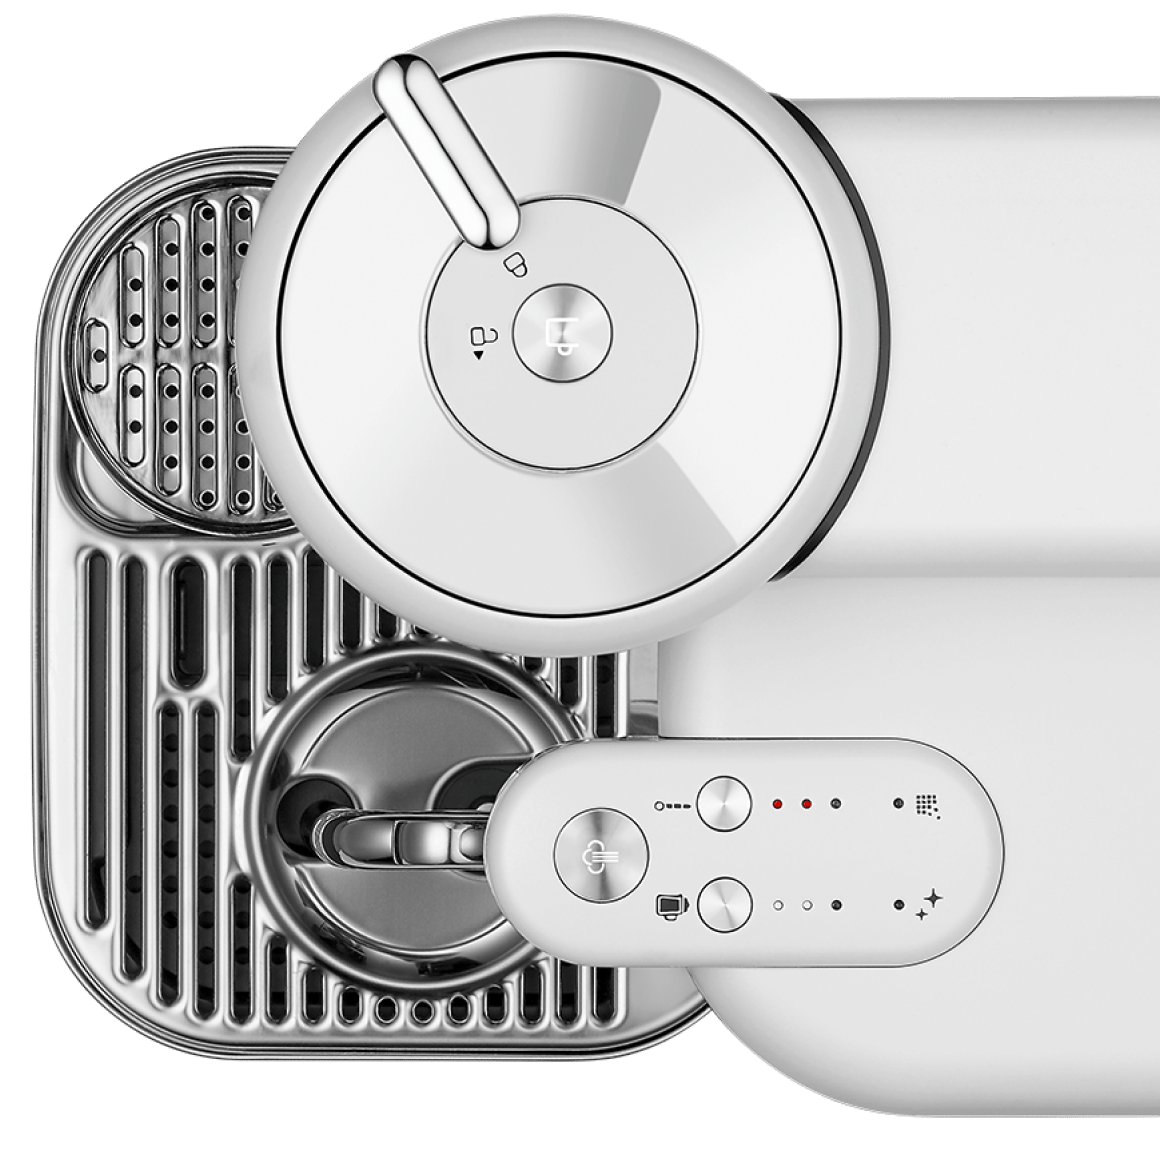 https://www.nespresso.com/shared_res/agility/global/machines/vl/machine-specifications/vertuo-creatista_sea-salt_d_2x.png